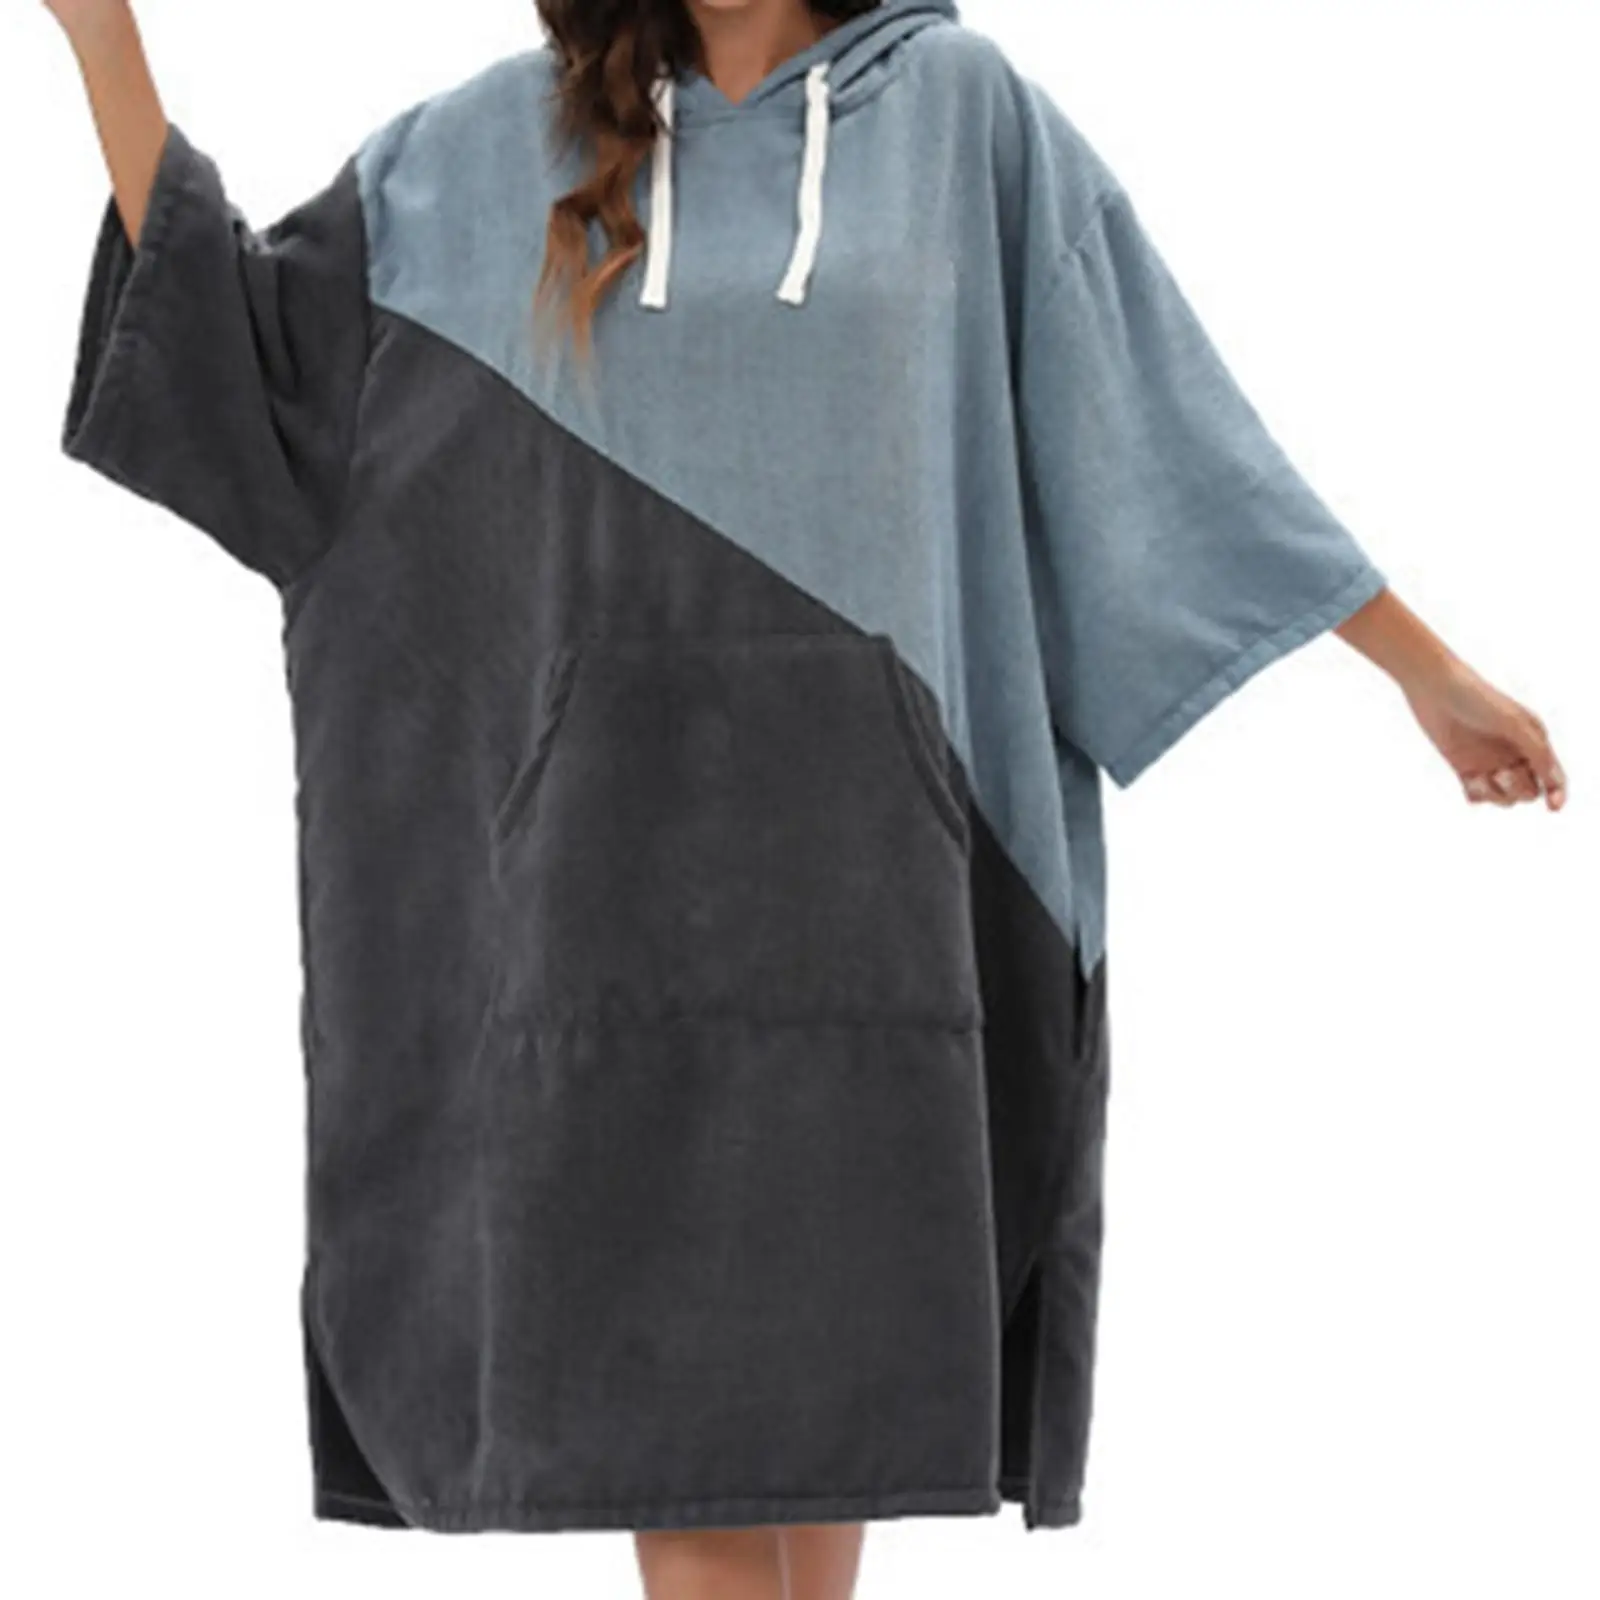 Microfiber Poncho Towel Surf Beach Wetsuit Changing Bath Robe with Hood,Watersports Activities,Adults Men Women Kids